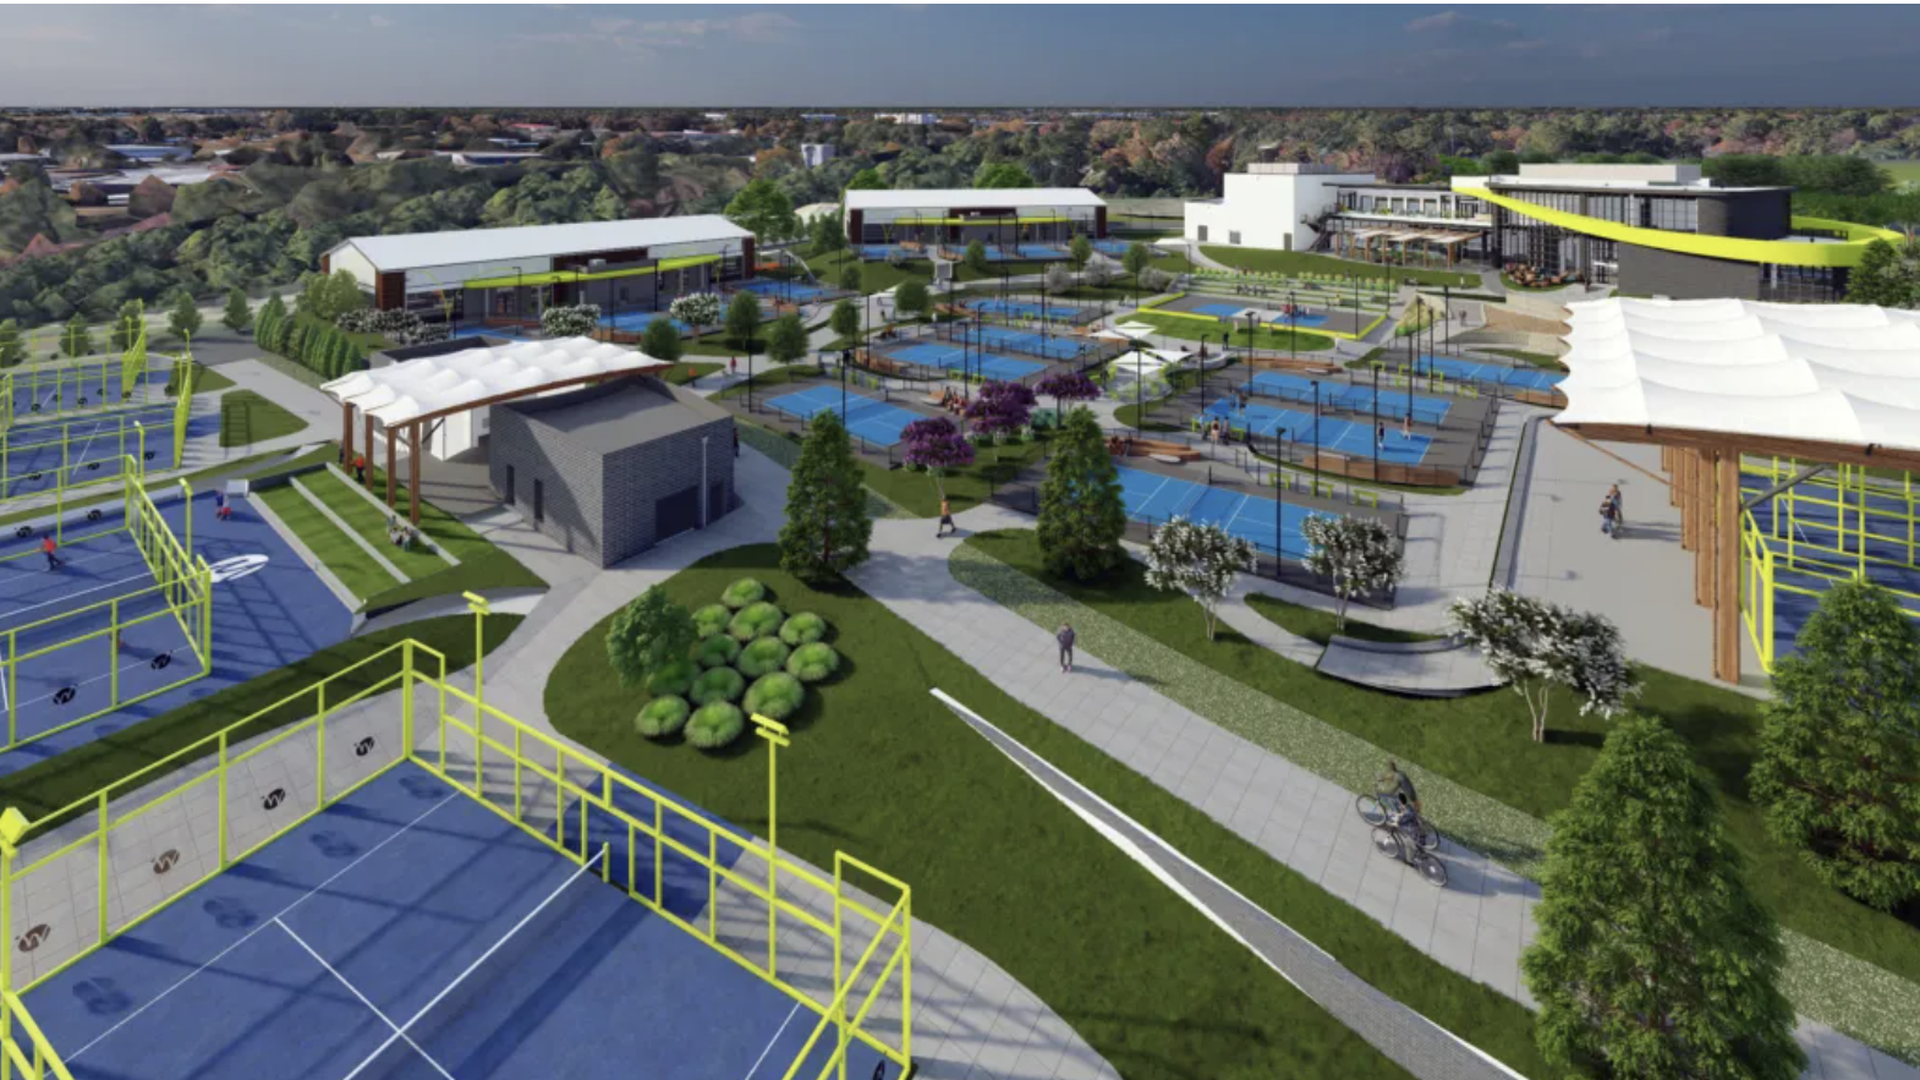 Swing Racquet + Paddle is building an ambitious complex for pickleball and tennis in Brier Creek. Photo: Swing Racquet + Paddle